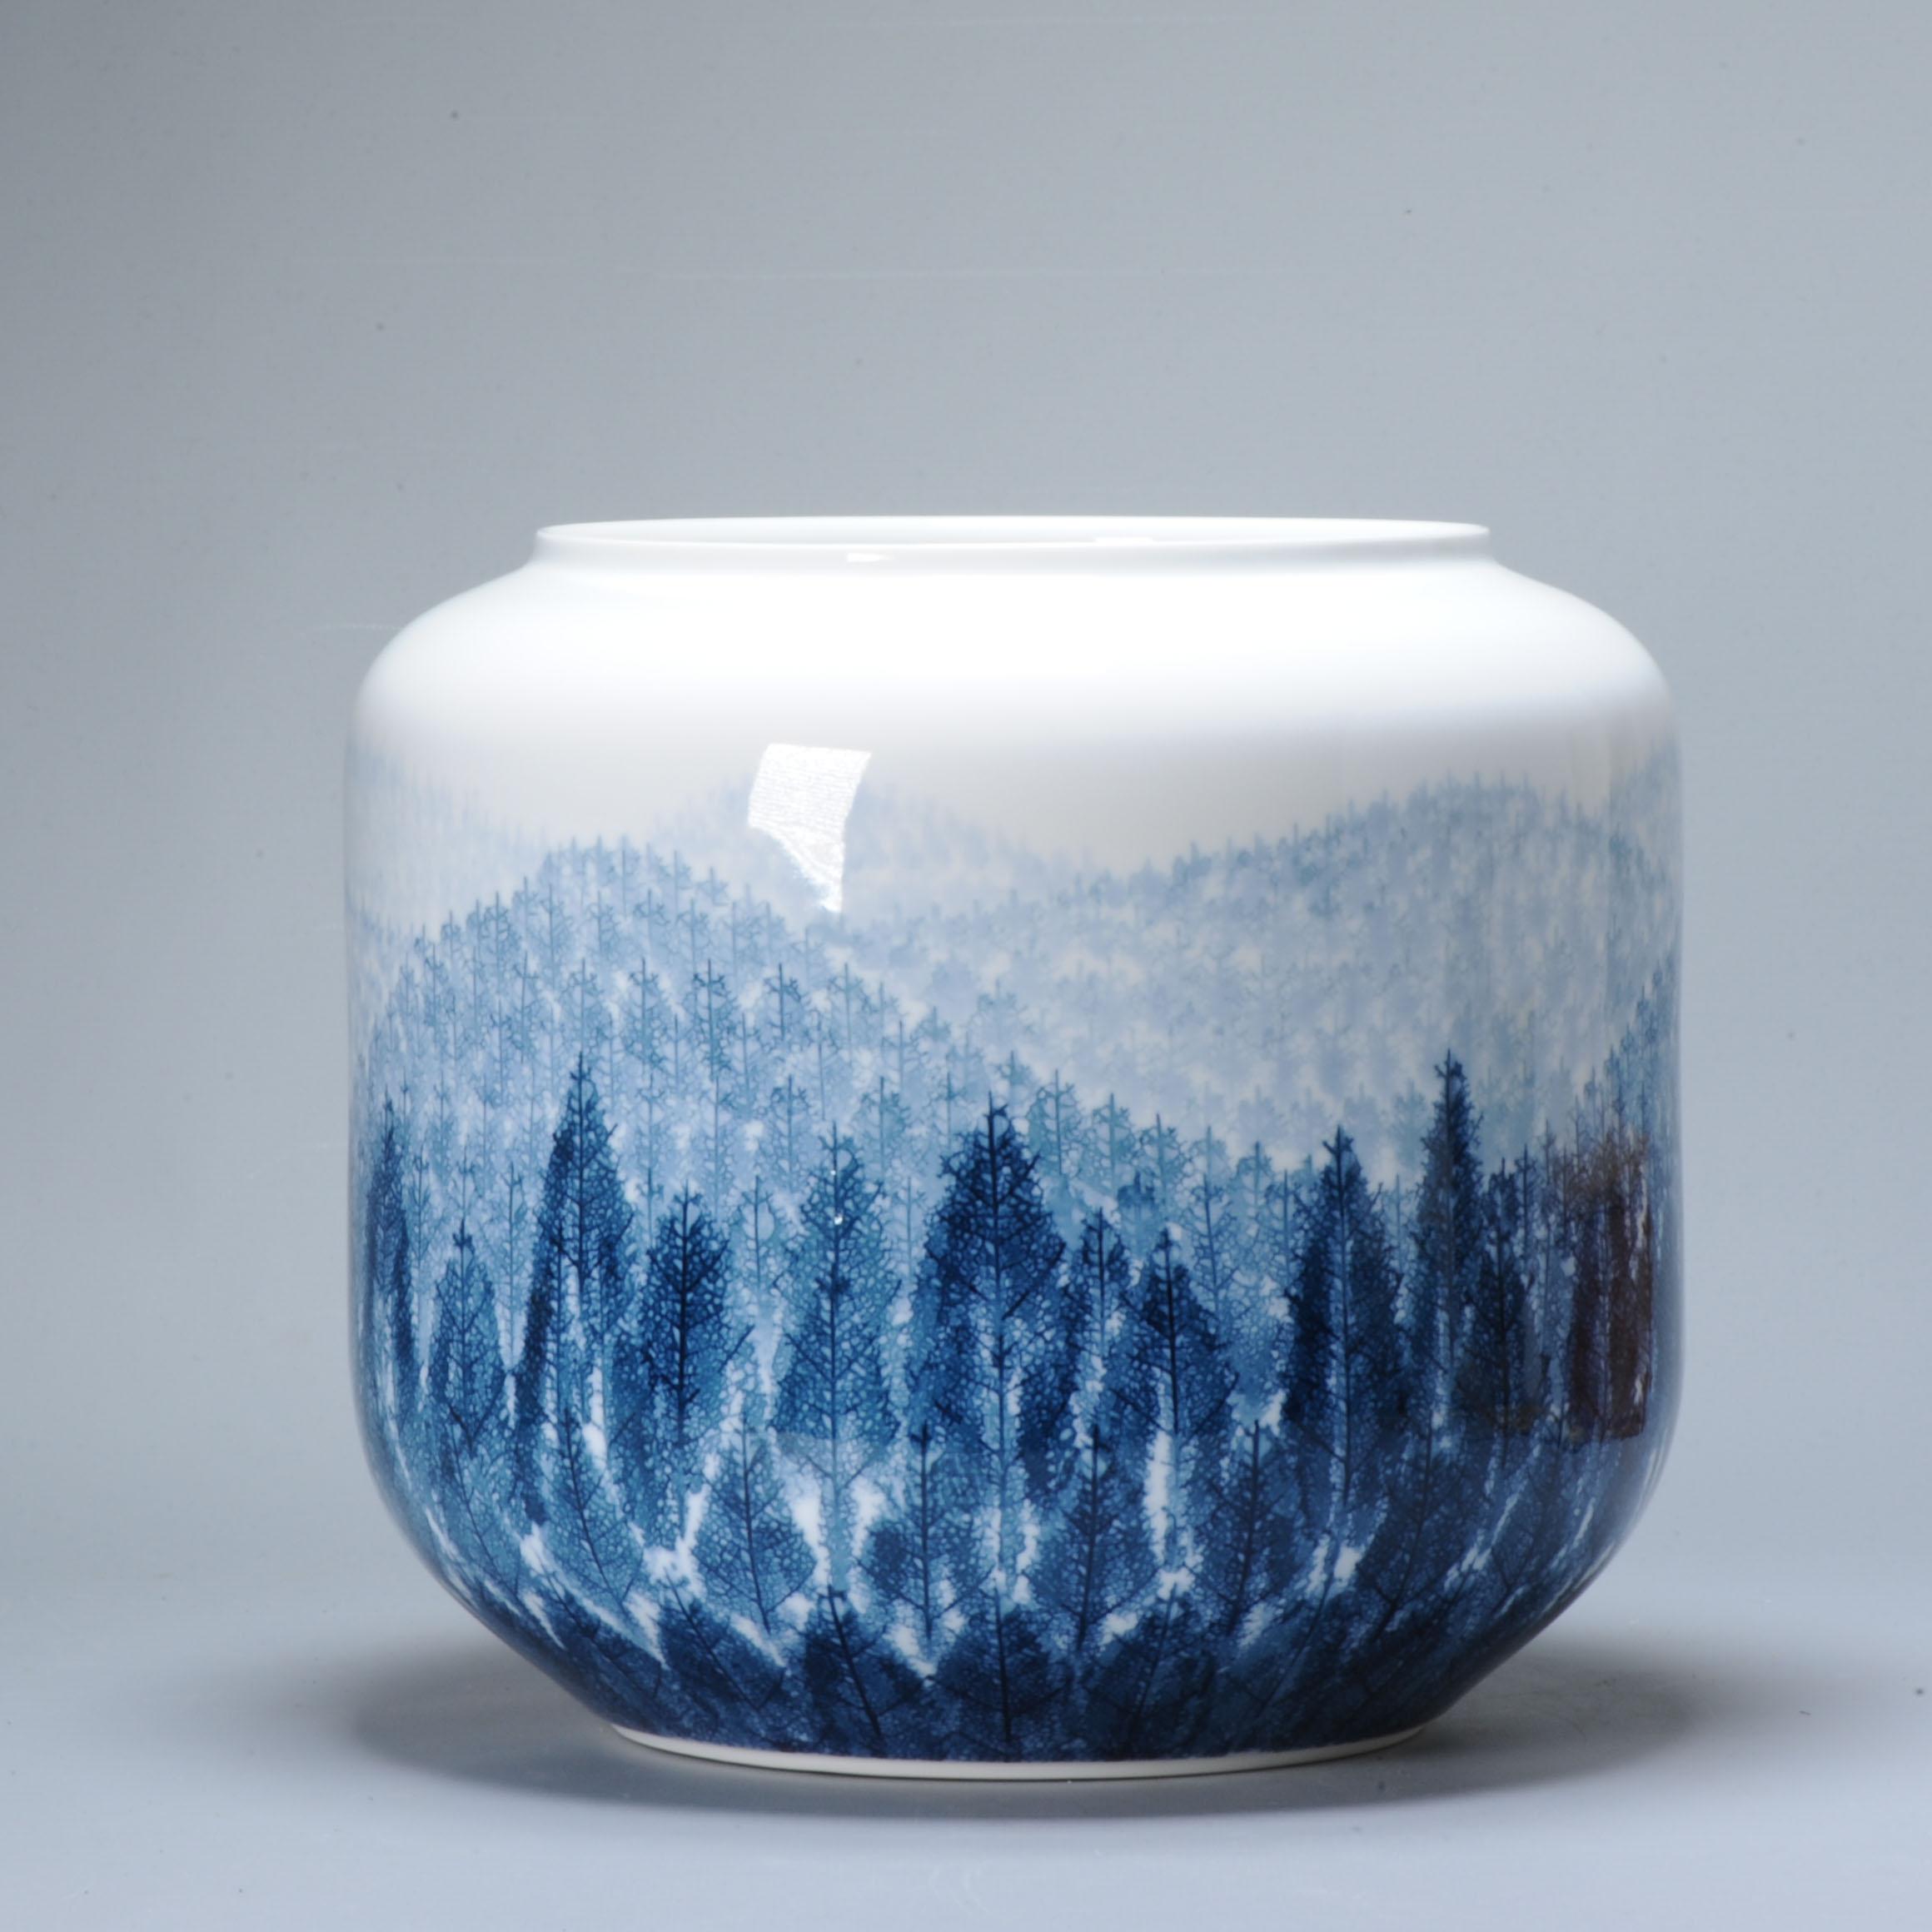 Lovely and rare piece with matching storage box.

A superb blue and white porcelain vase, with a landscape. Made by Fuji Shumei

Fujii Mr. Aki Fujii's specialty is the technique of drawing a mountain by simulating the veins of a leaf, called the